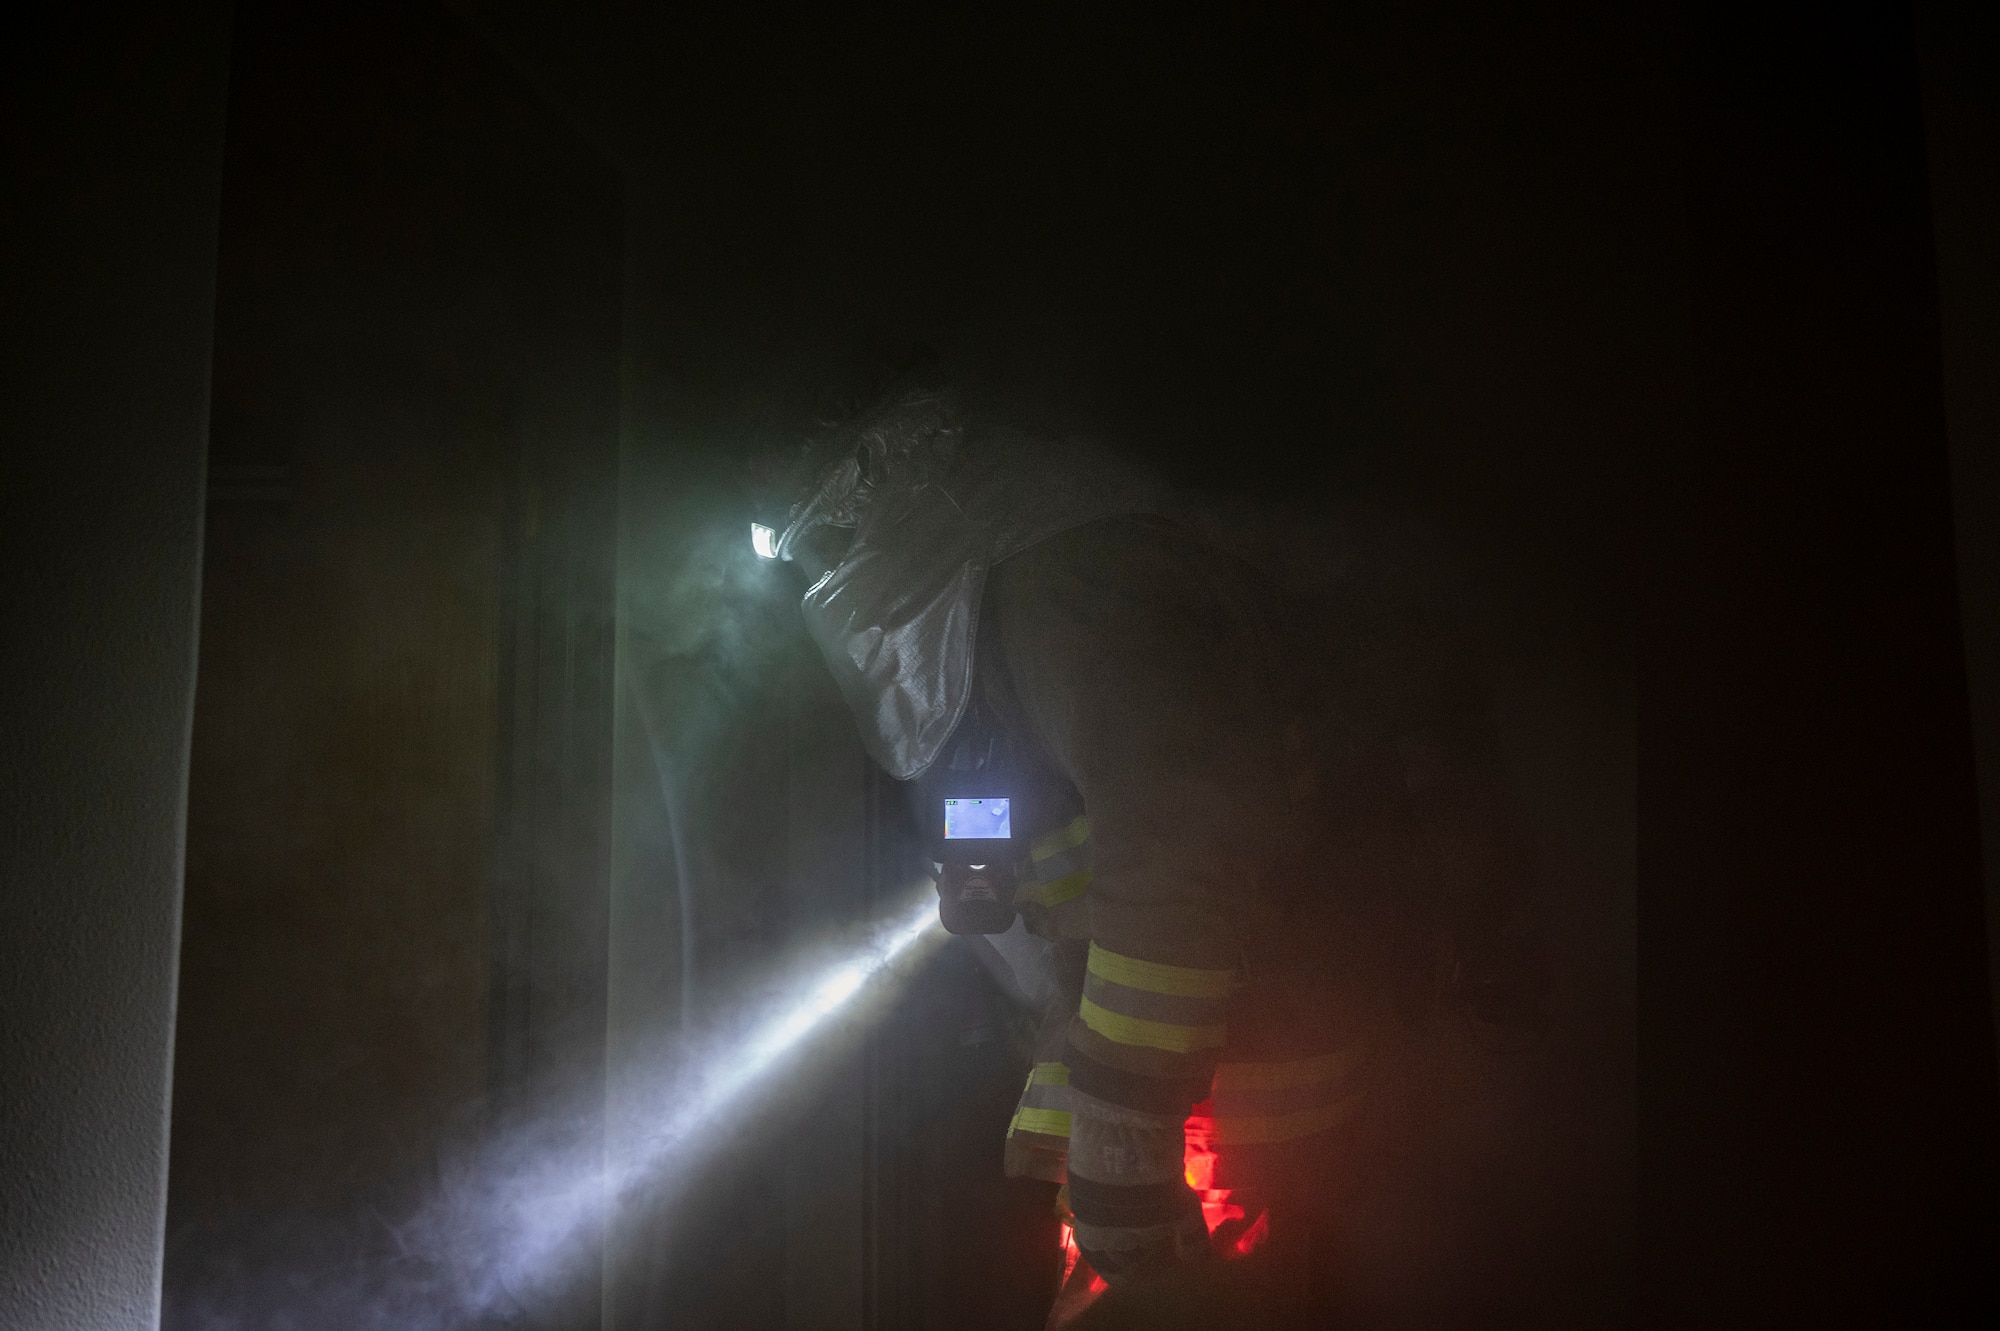 U.S. Air Force Airman 1st Class Joey Vue, 51st Civil Engineer Squadron (CES) firefighter, enters a smoke-filled building during a fire response training scenario at Osan Air Base, Republic of Korea, Sept. 14, 2022.